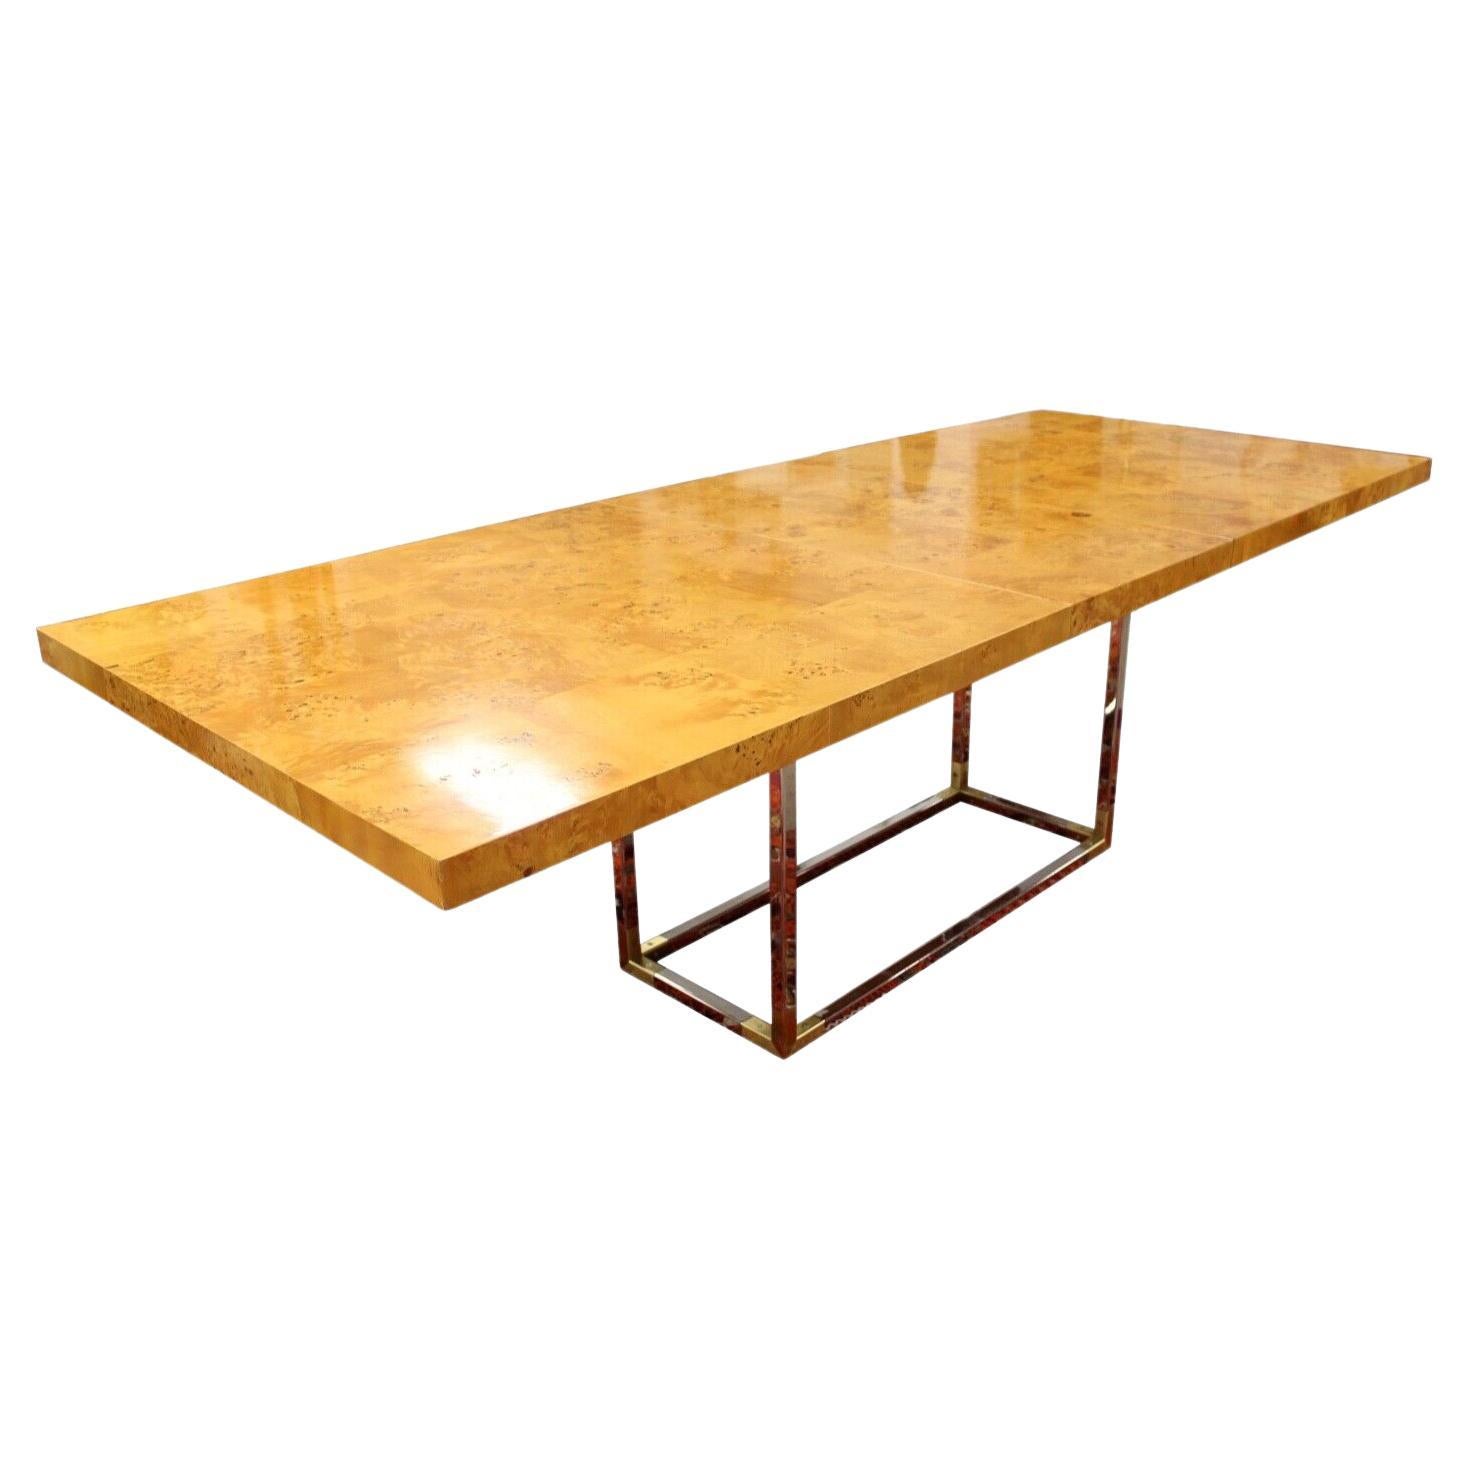 Contemporary Burlwood Extendable Dining Table W/ Brass and Chrome Base by Adler